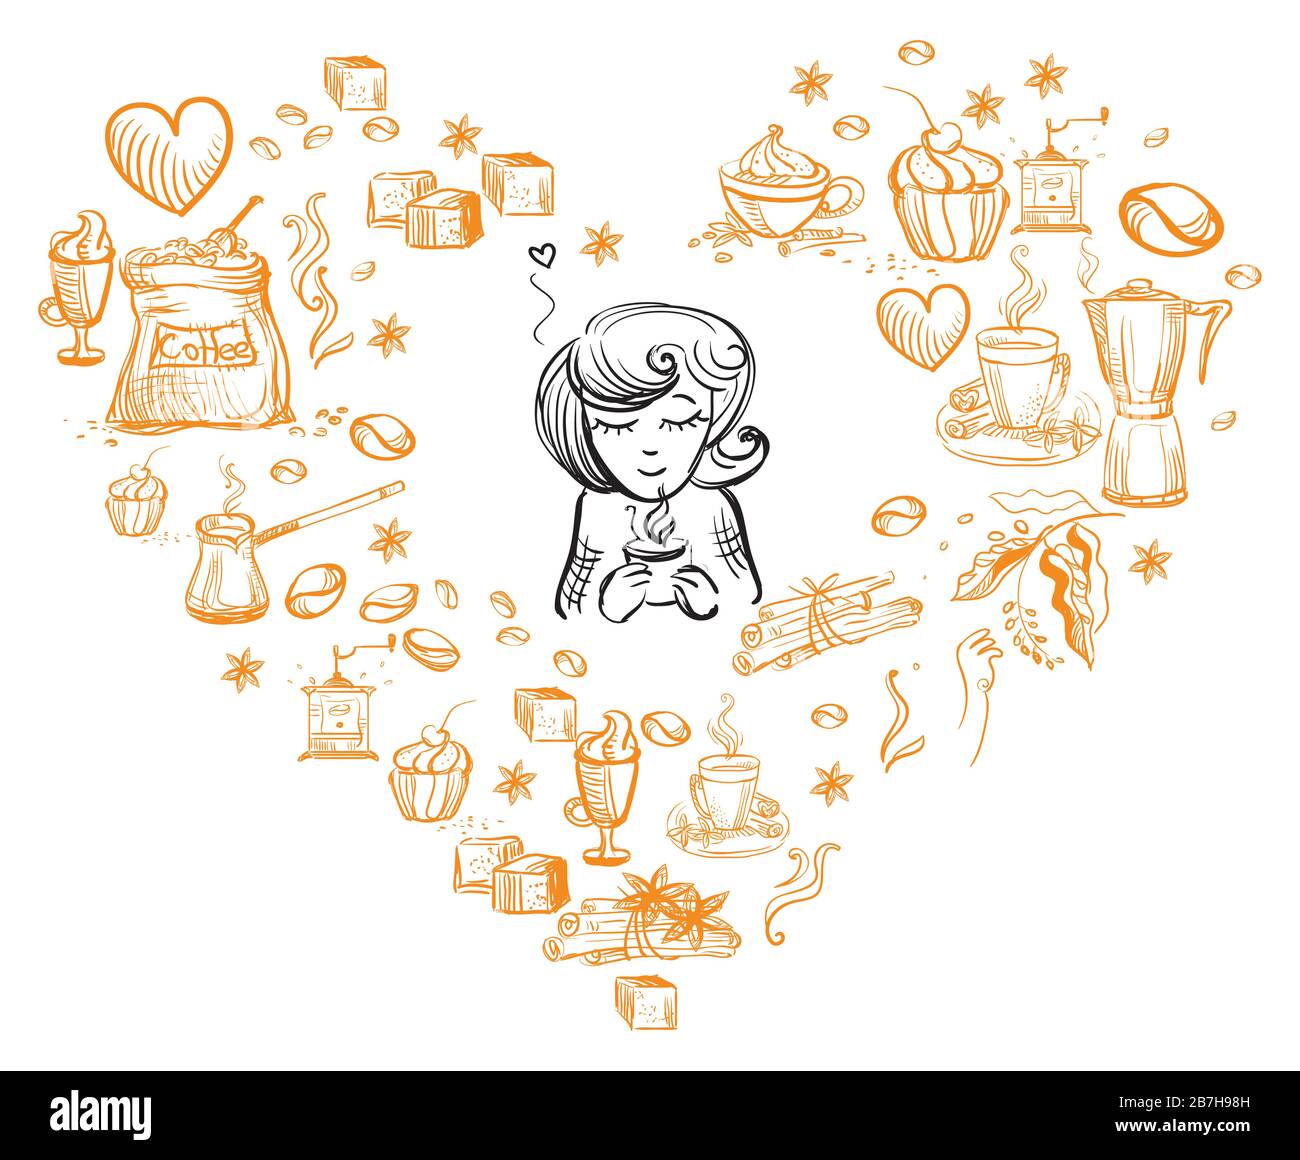 Hand drawing vector doodle style coffee theme. Young girl with cup of coffee inside a heart with coffee icons isolated on white background. Food and d Stock Vector